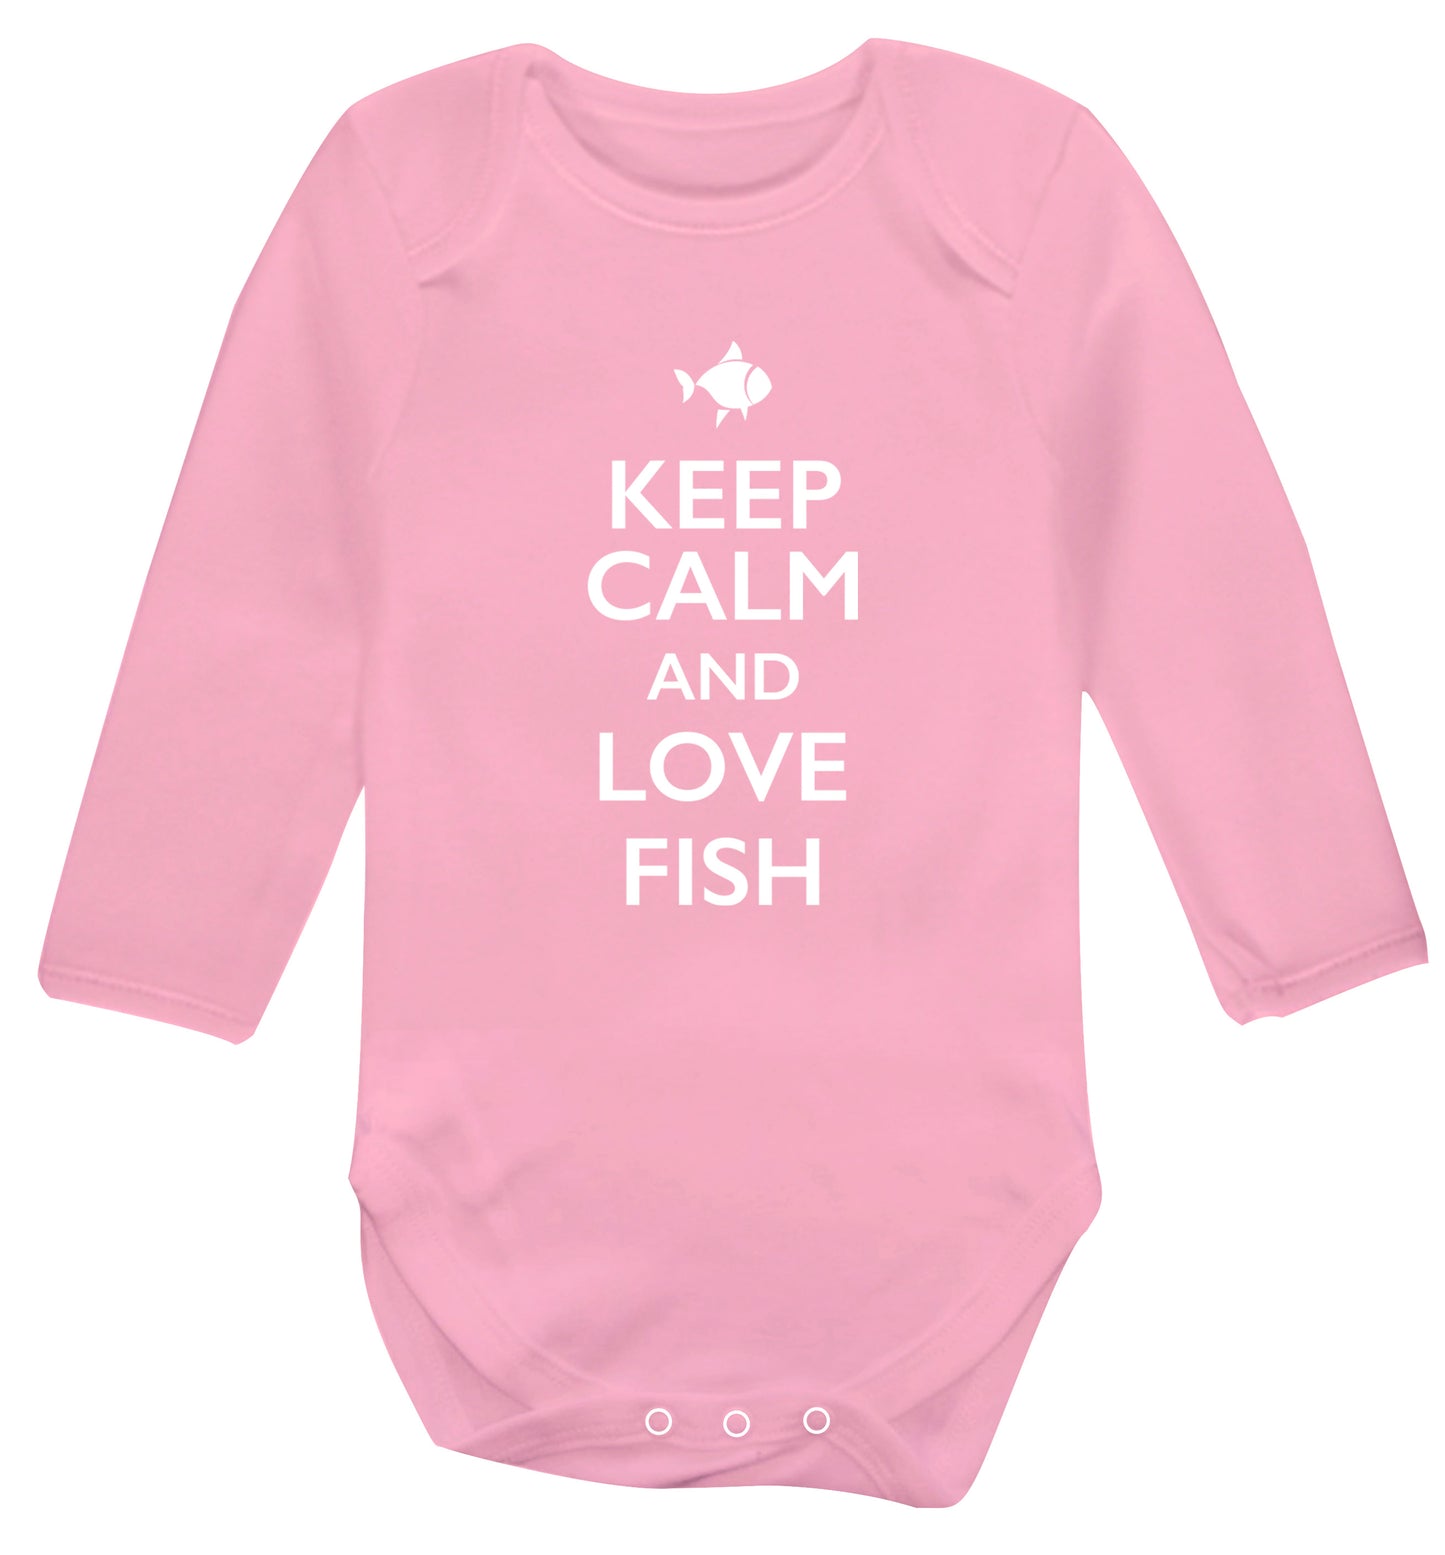 Keep calm and love fish Baby Vest long sleeved pale pink 6-12 months